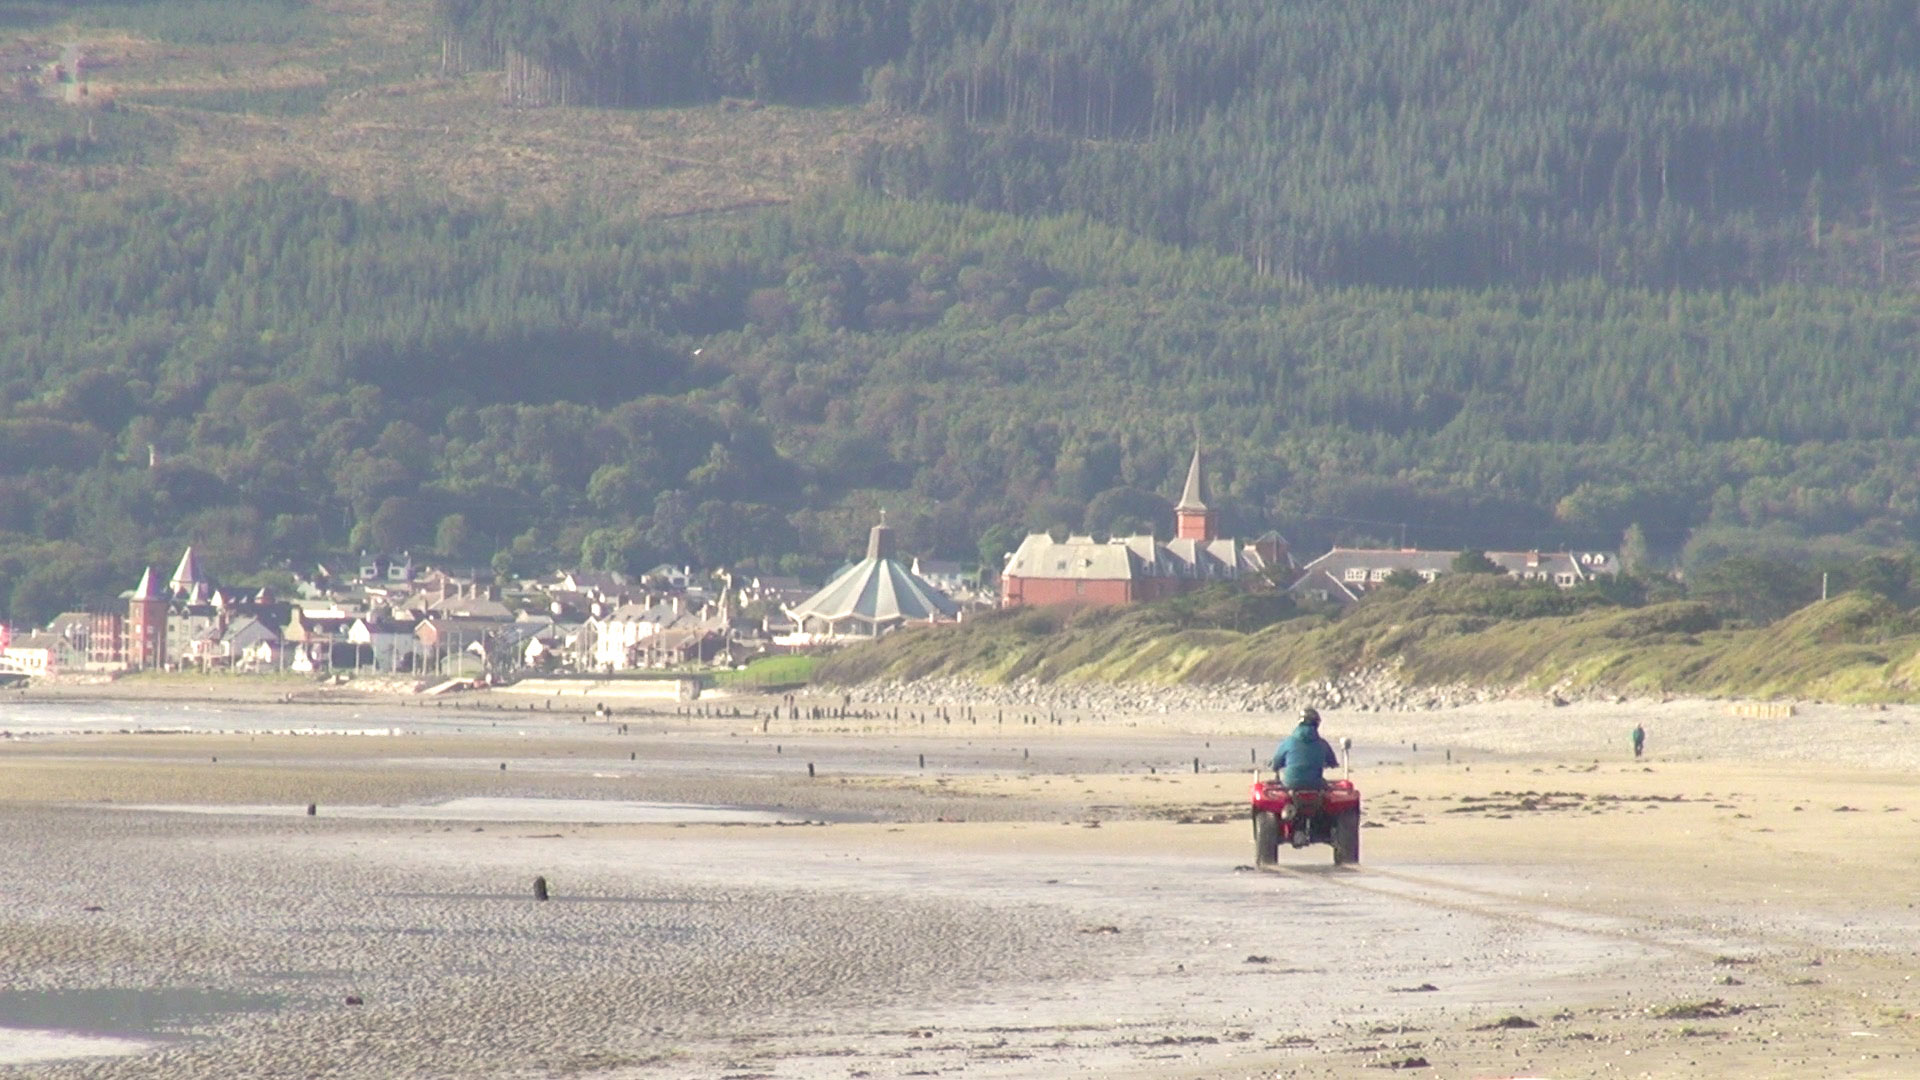 Newcastle in Co Down has experienced a loss of most of its sandy beaches due to erosion processes